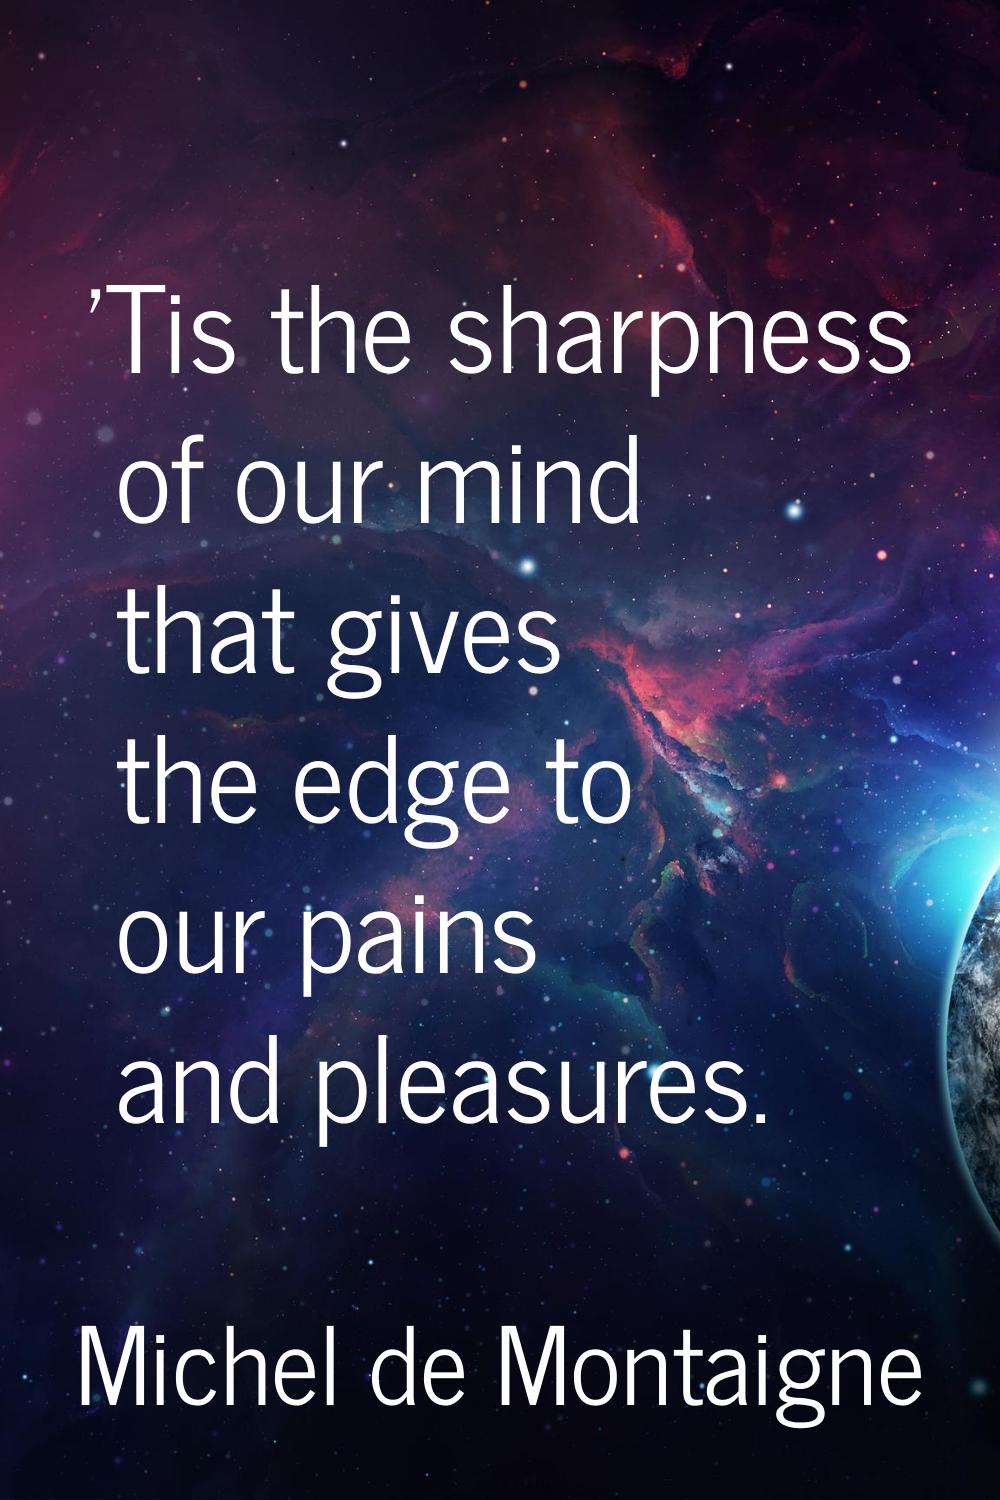 'Tis the sharpness of our mind that gives the edge to our pains and pleasures.